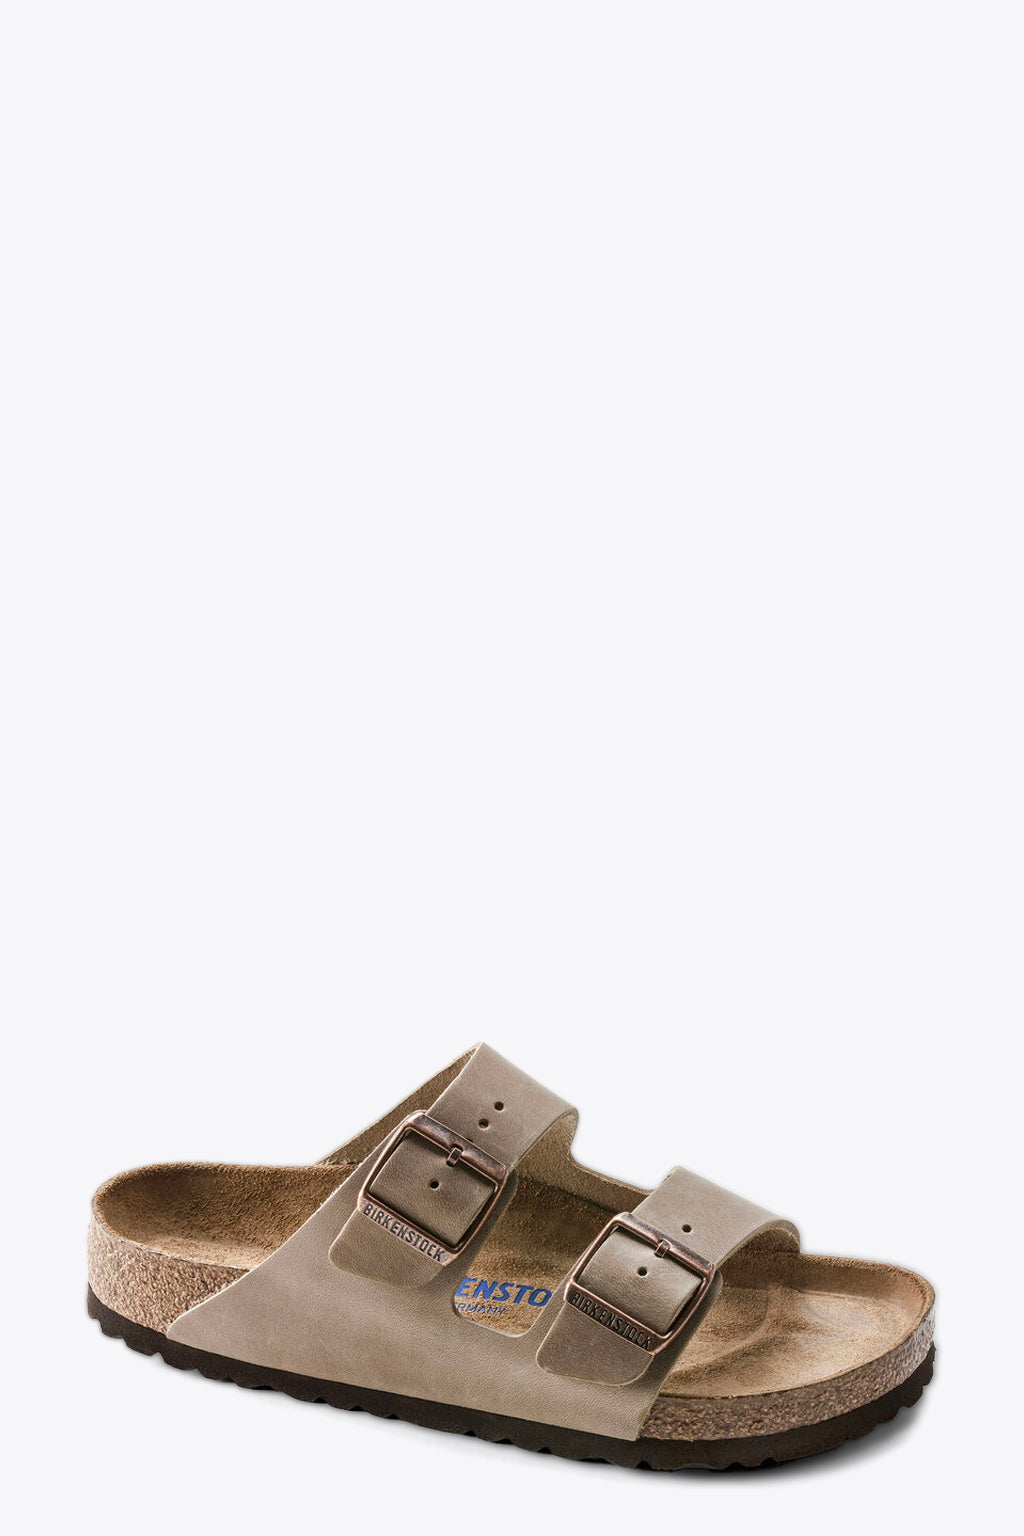 alt-image__Tobacco-brown-leather-sandal-with-buckles---Arizona